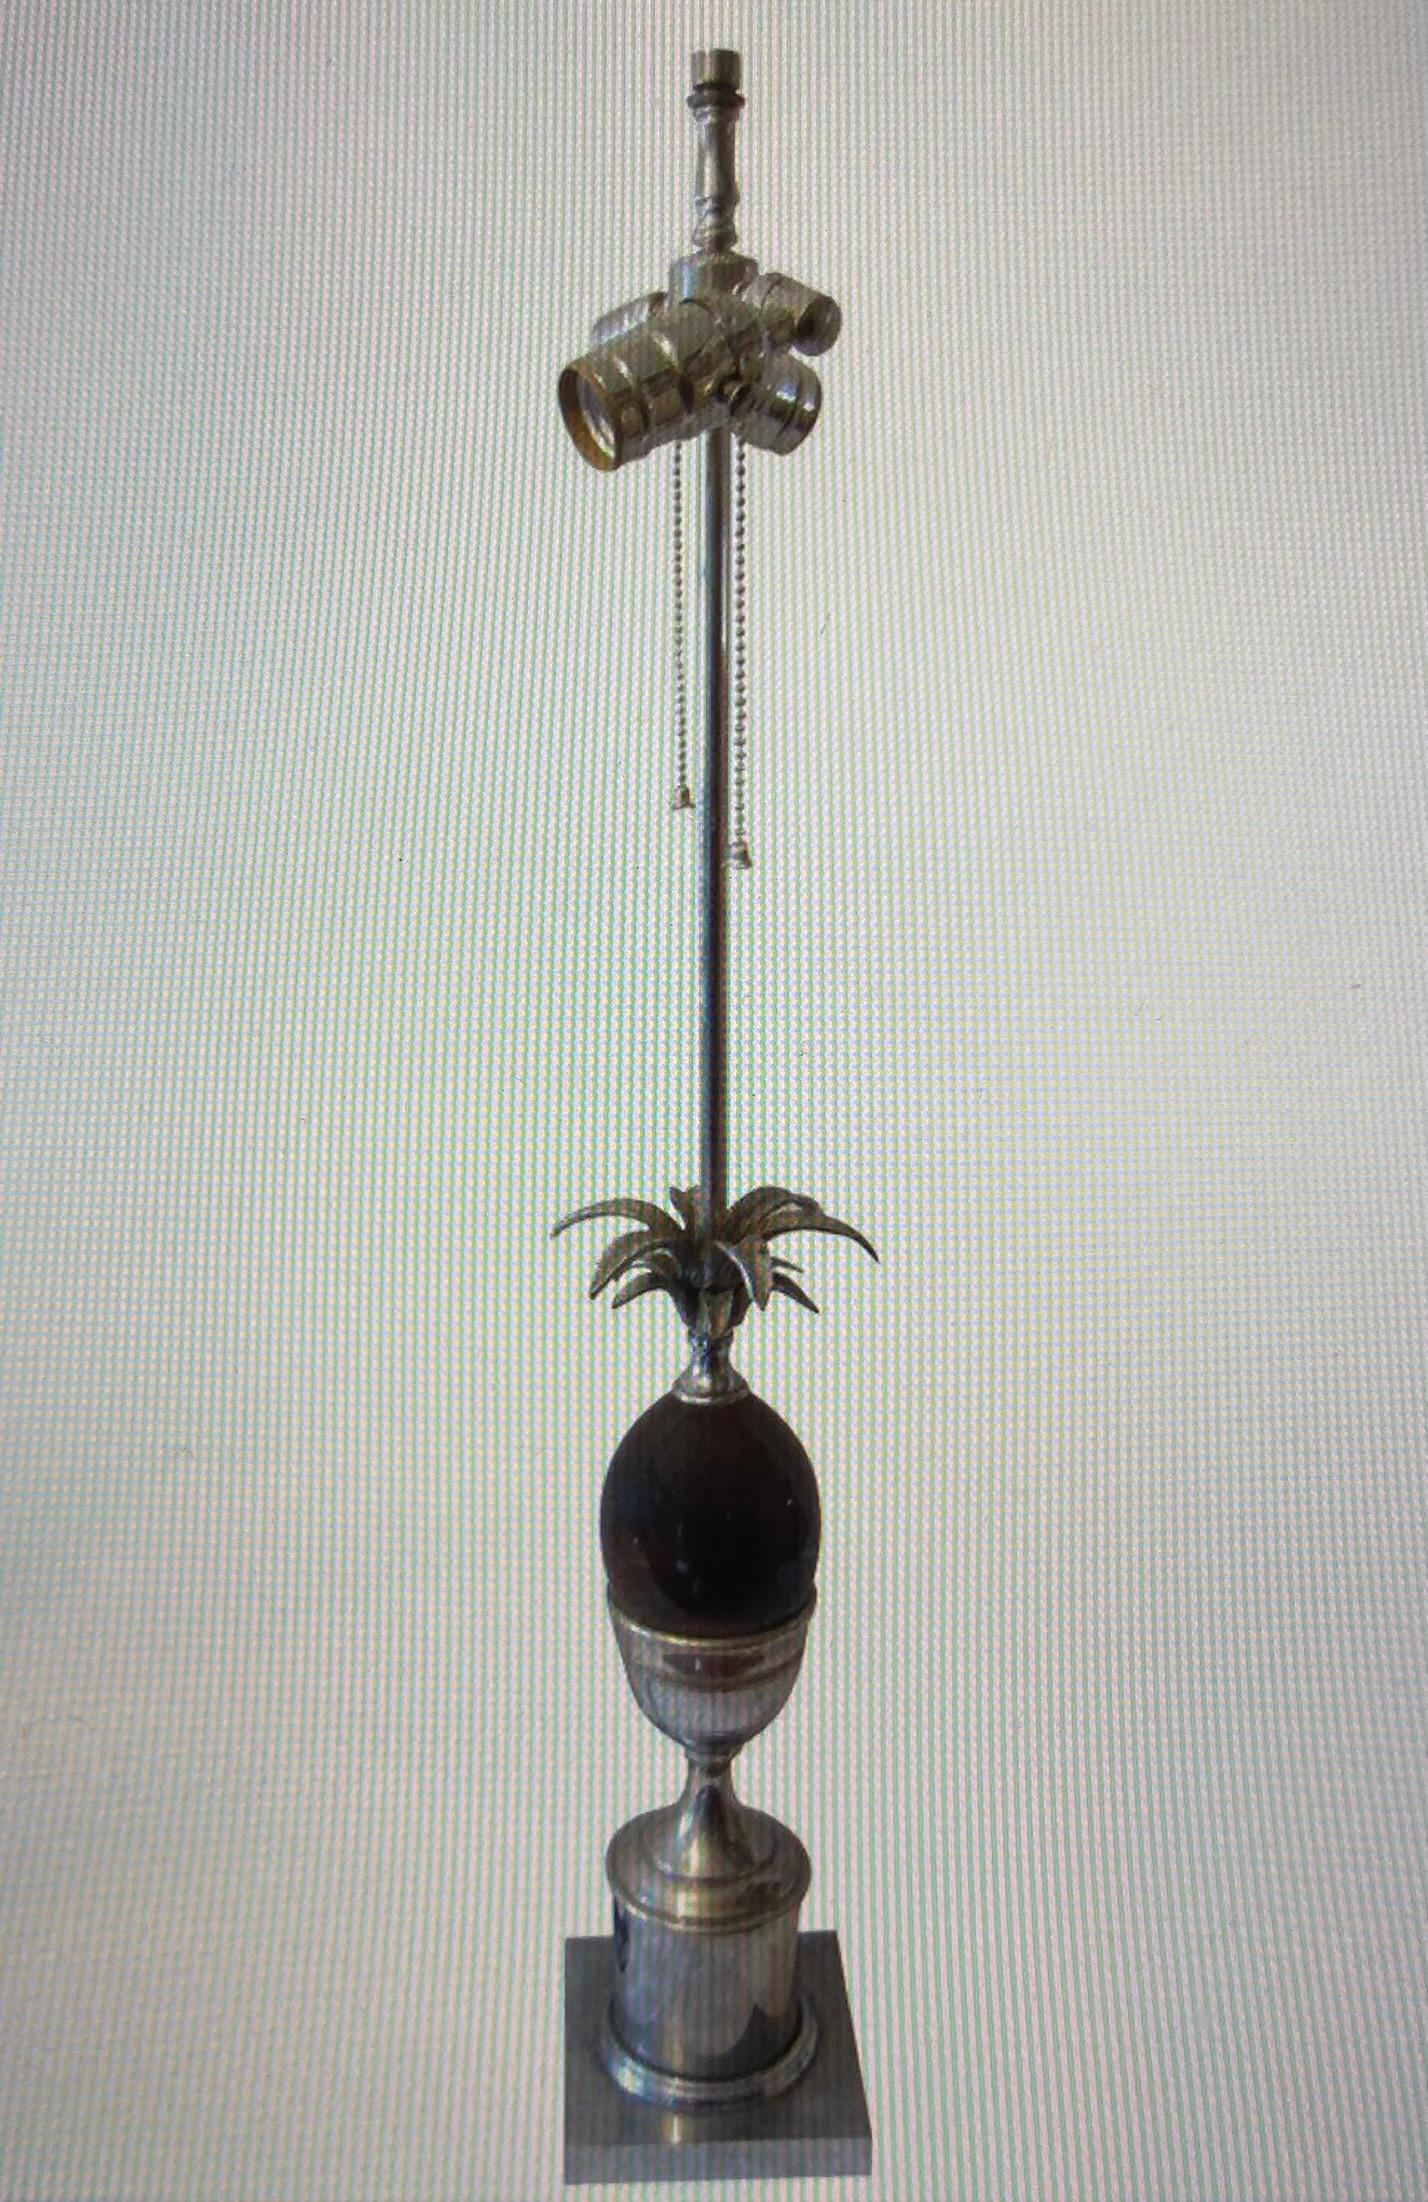 Steel and marble pineapple table lamp by Maison Charles, Paris, circa 1970s.